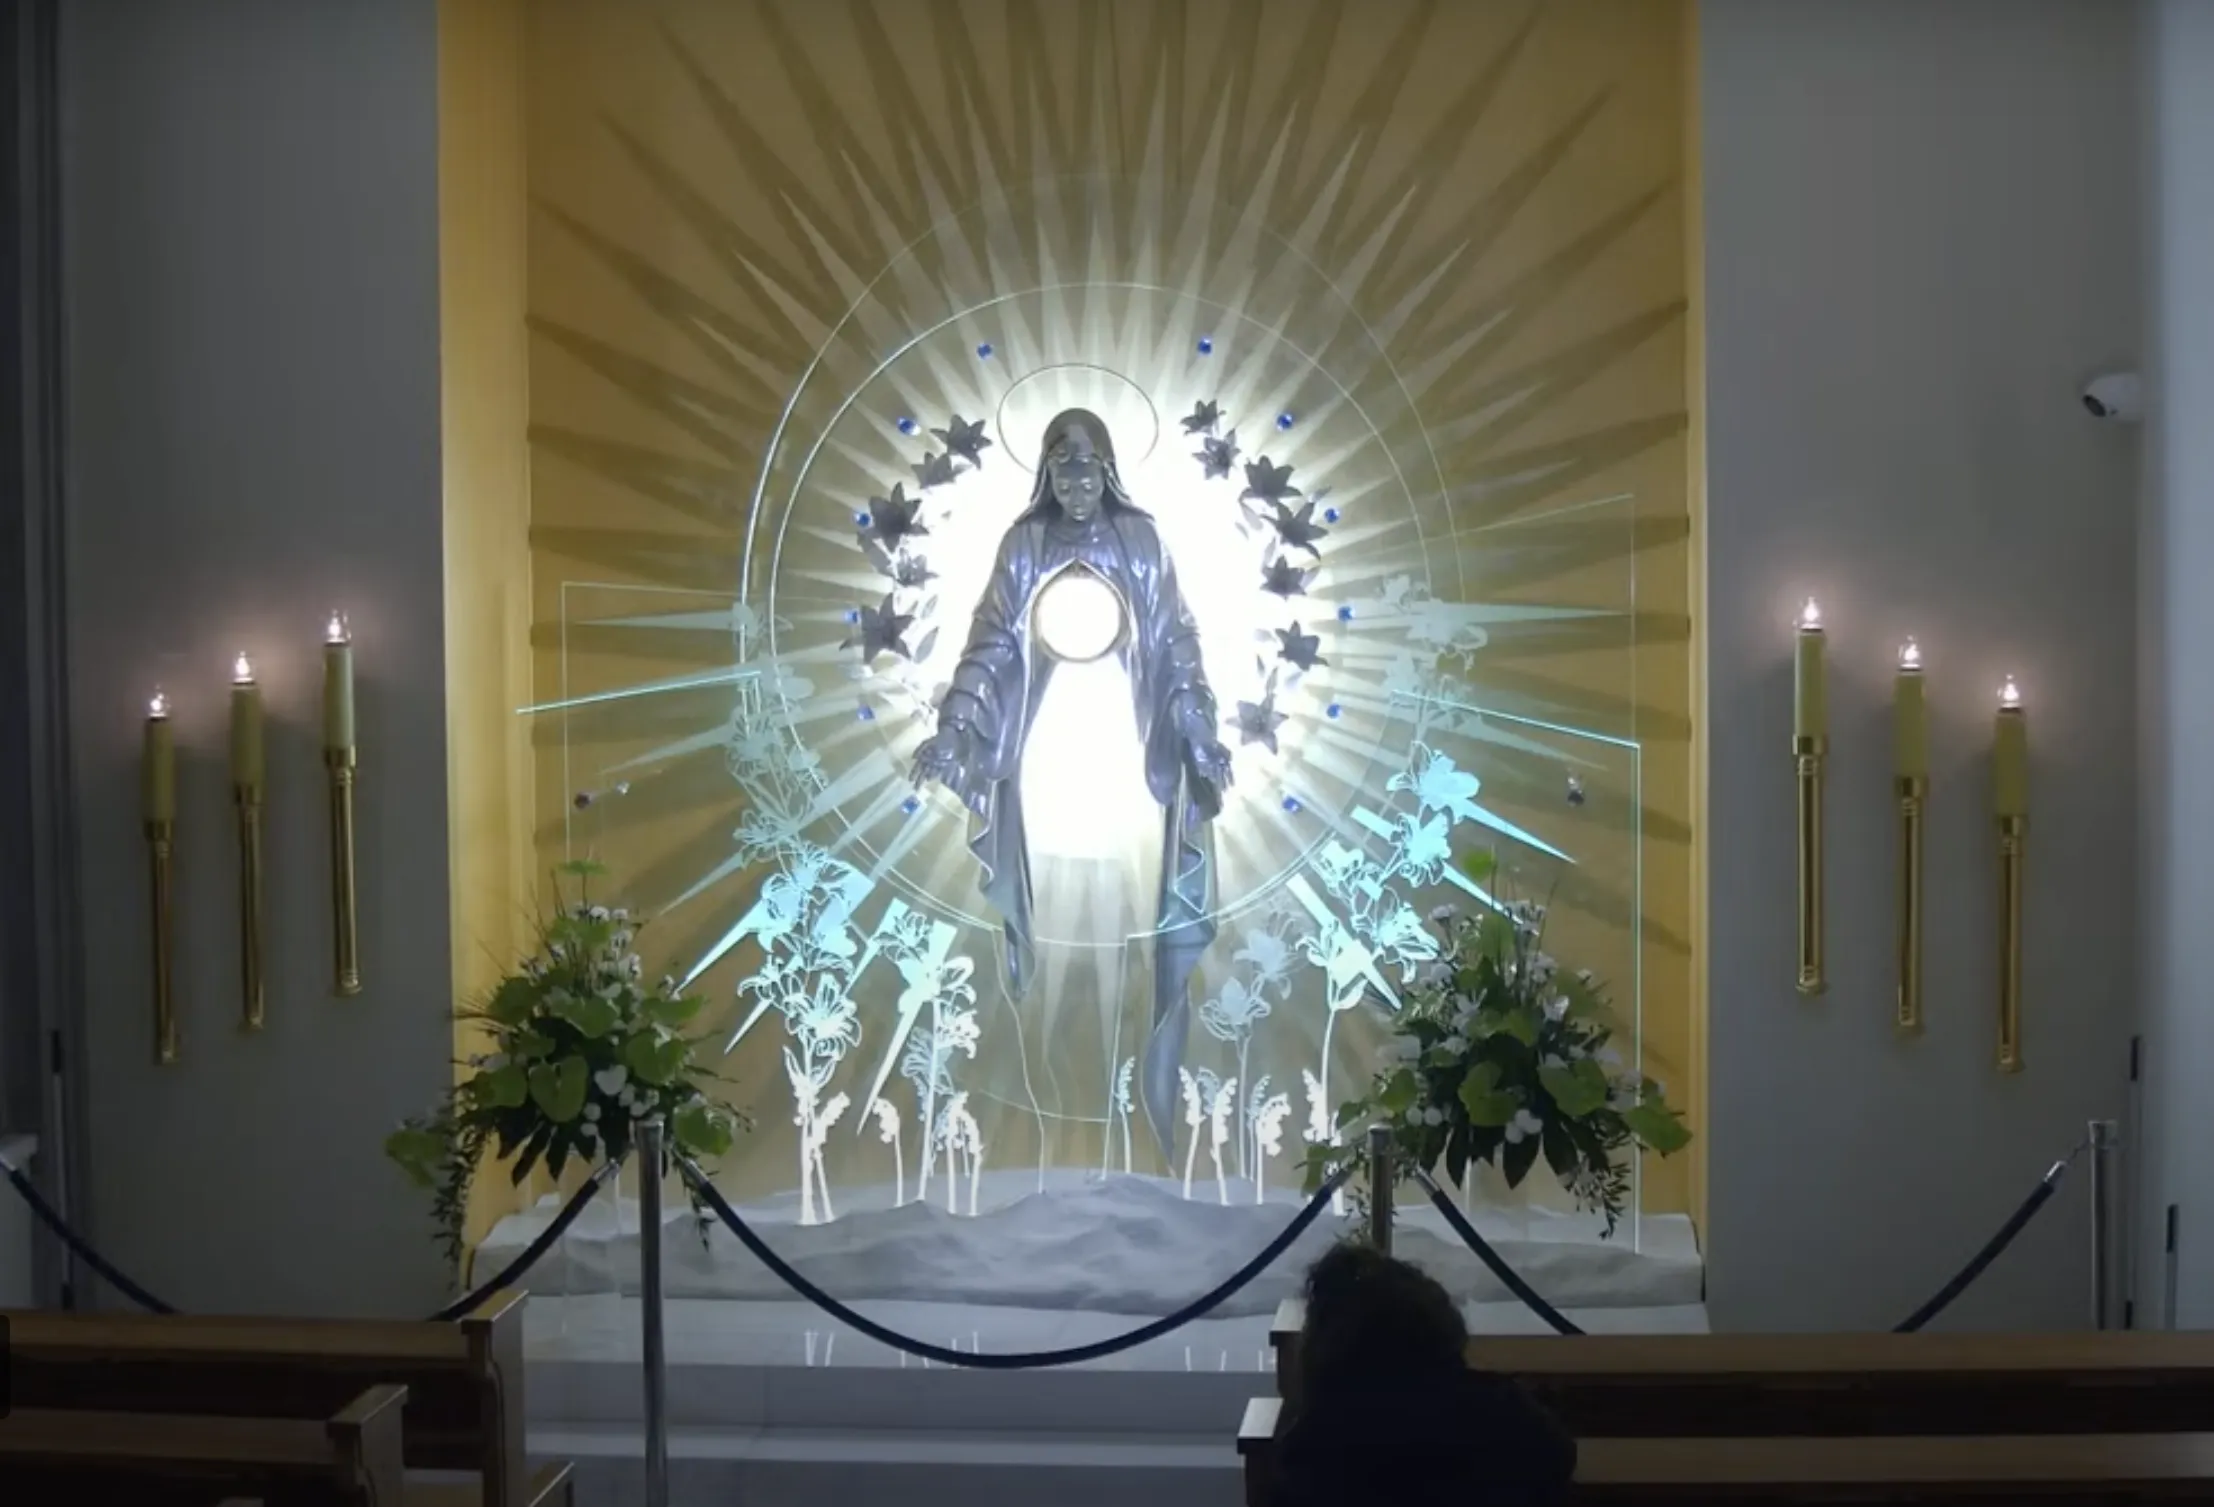 EWTN Poland's YouTube channel features a live broadcast from the Adoration Chapel in Niepokalanów, the monastery founded by St. Maximilian Kolbe, that attracts almost one million users a month.?w=200&h=150